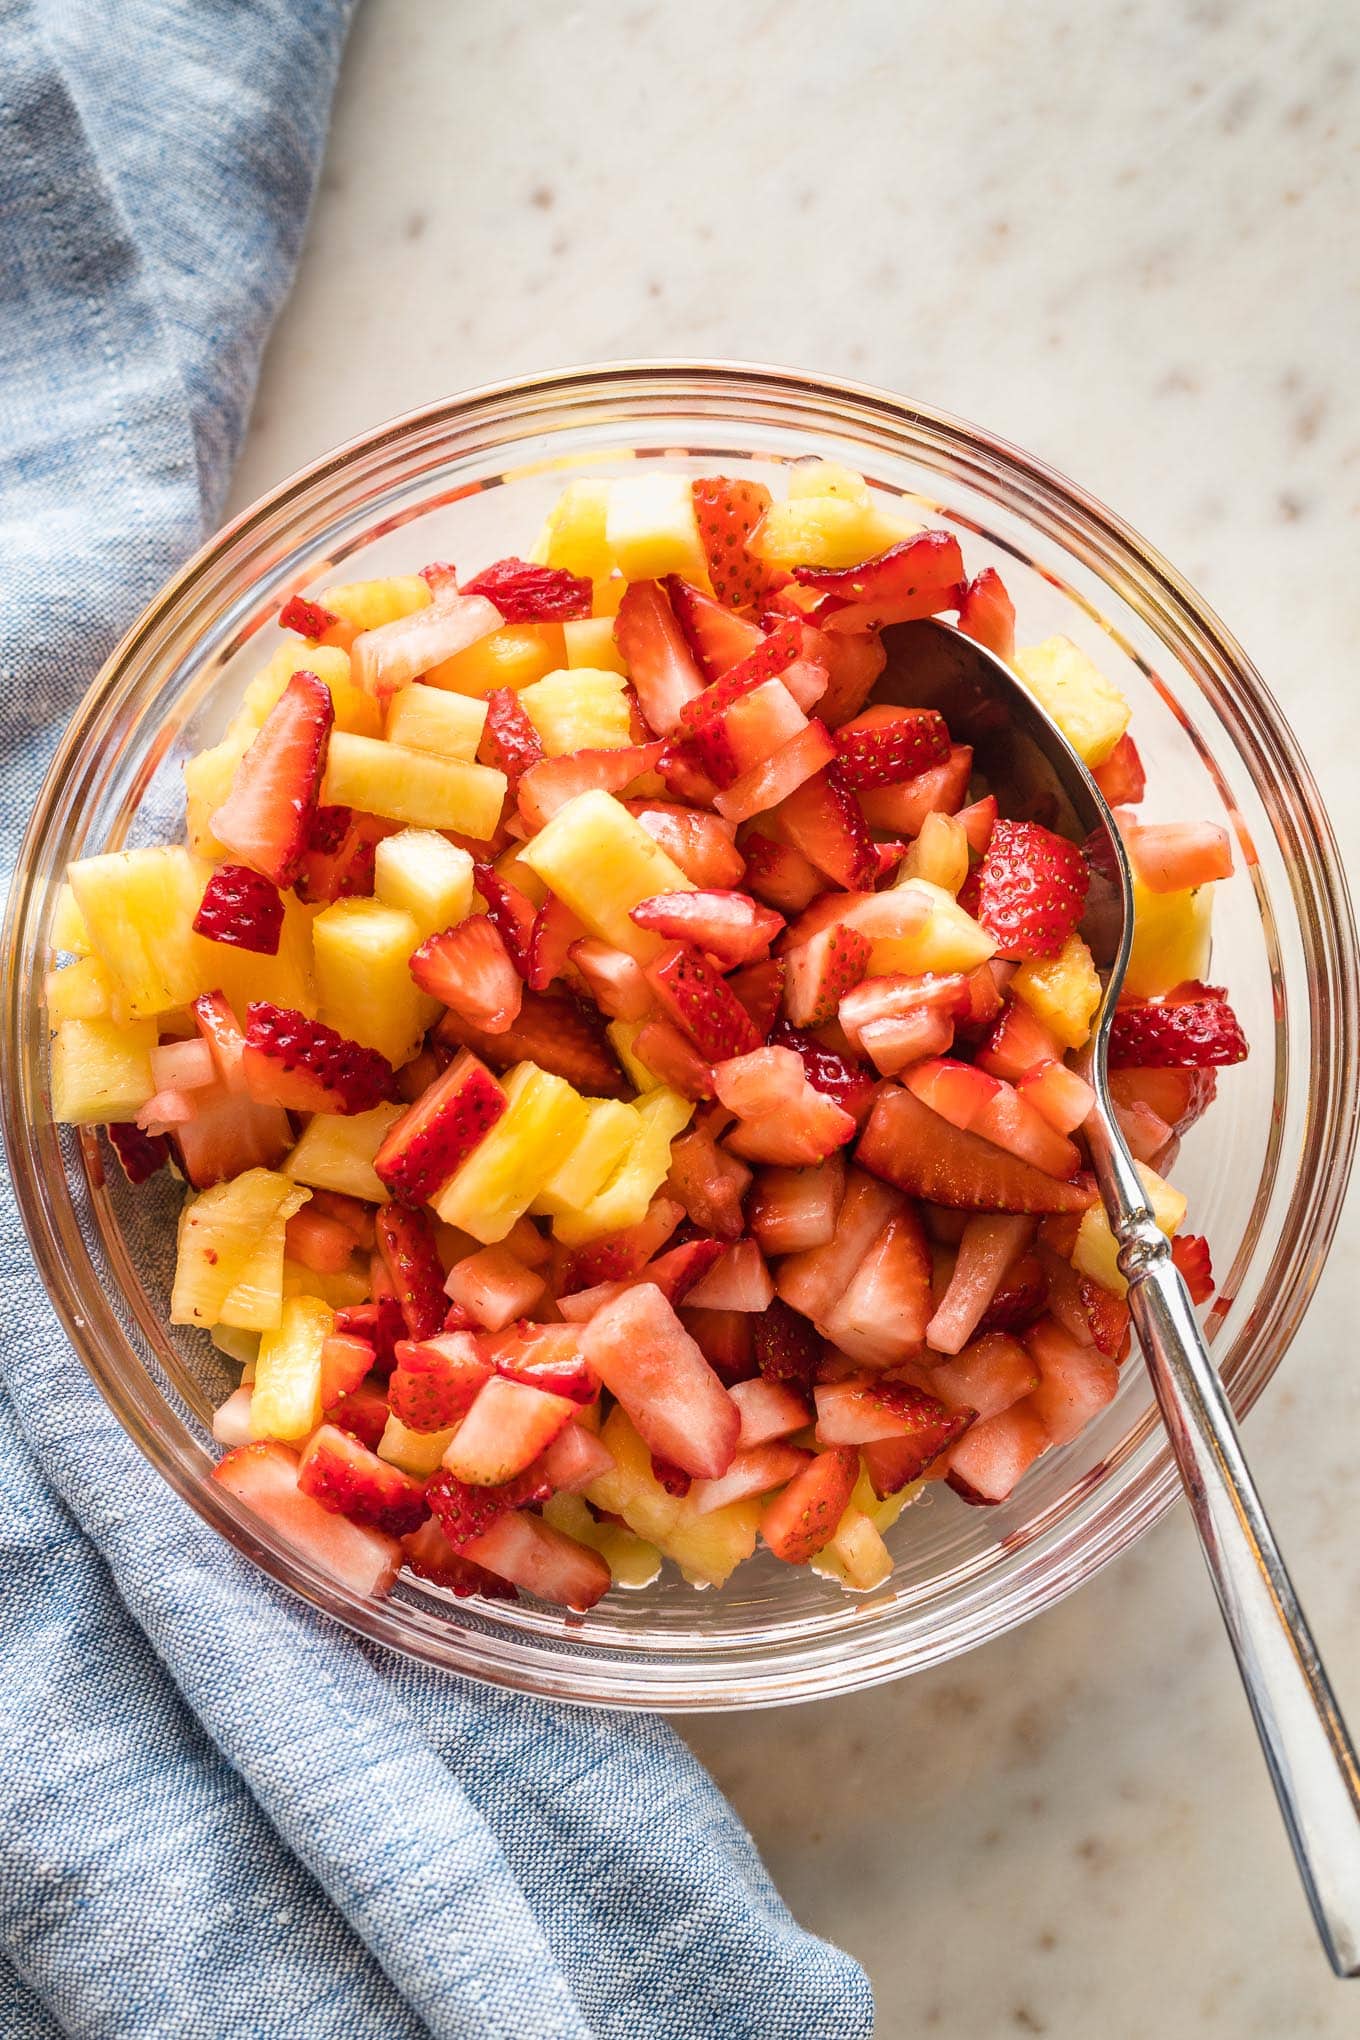 Diced strawberries and pineapple chunks mixed together in a clear glass serving bowl.